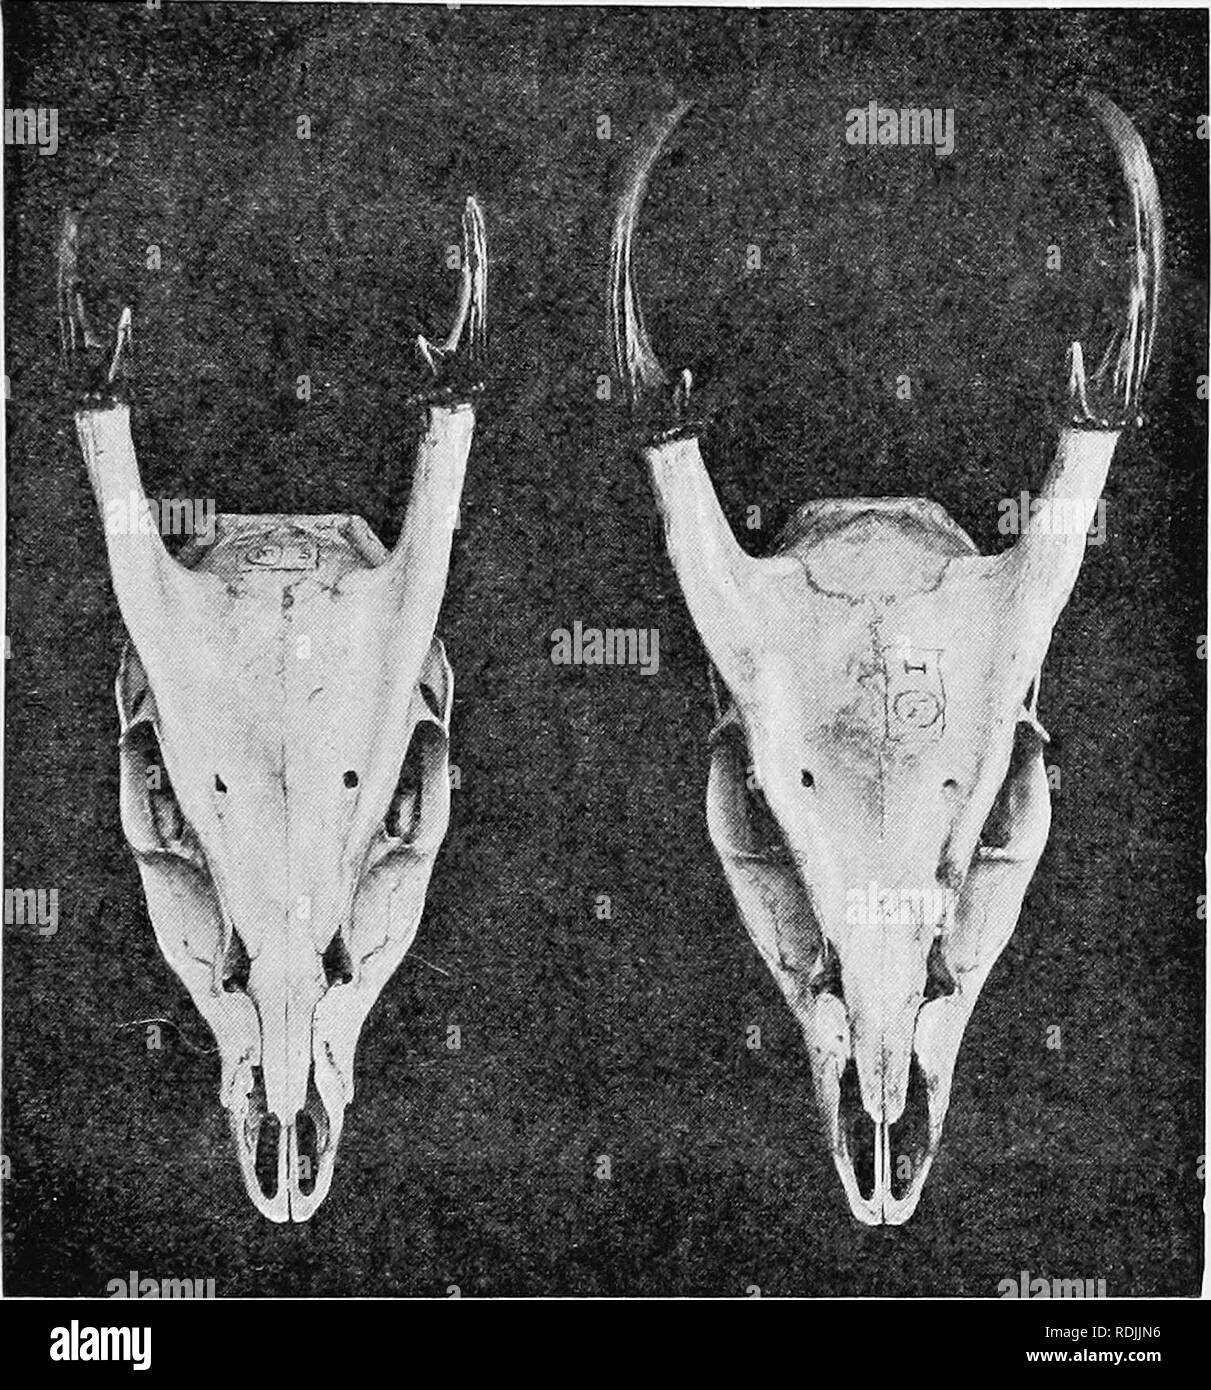 . Catalogue of the ungulate mammals in the British Museum (Natural History). Ungulates. CERVIDiE 29 1)1. 1. 7. 1. Skull and skin, young. Amoy, China; collected by E. Swinlioe, Esq. The first molar is not yet ii use. Piirchased, 1861. 72. 9. 3. 2. Skull and skin, fenaale, in spotted coat. Ningpo; same collector. Furchased, 1872.. A B Pig. 5.—Skull and Antlebs of Ebbves's Muntjac (Muntiacusreevesi), A, and Beidgeman's Muntjao (M. sinensis], B. From Lydekker, Proc. Zool. Soc. 1910. 72. 9. 3. 8. Skeleton, subadult. Same locality and collector. Same history. 1524, a. Skeleton. Menagerie specimen. P Stock Photo